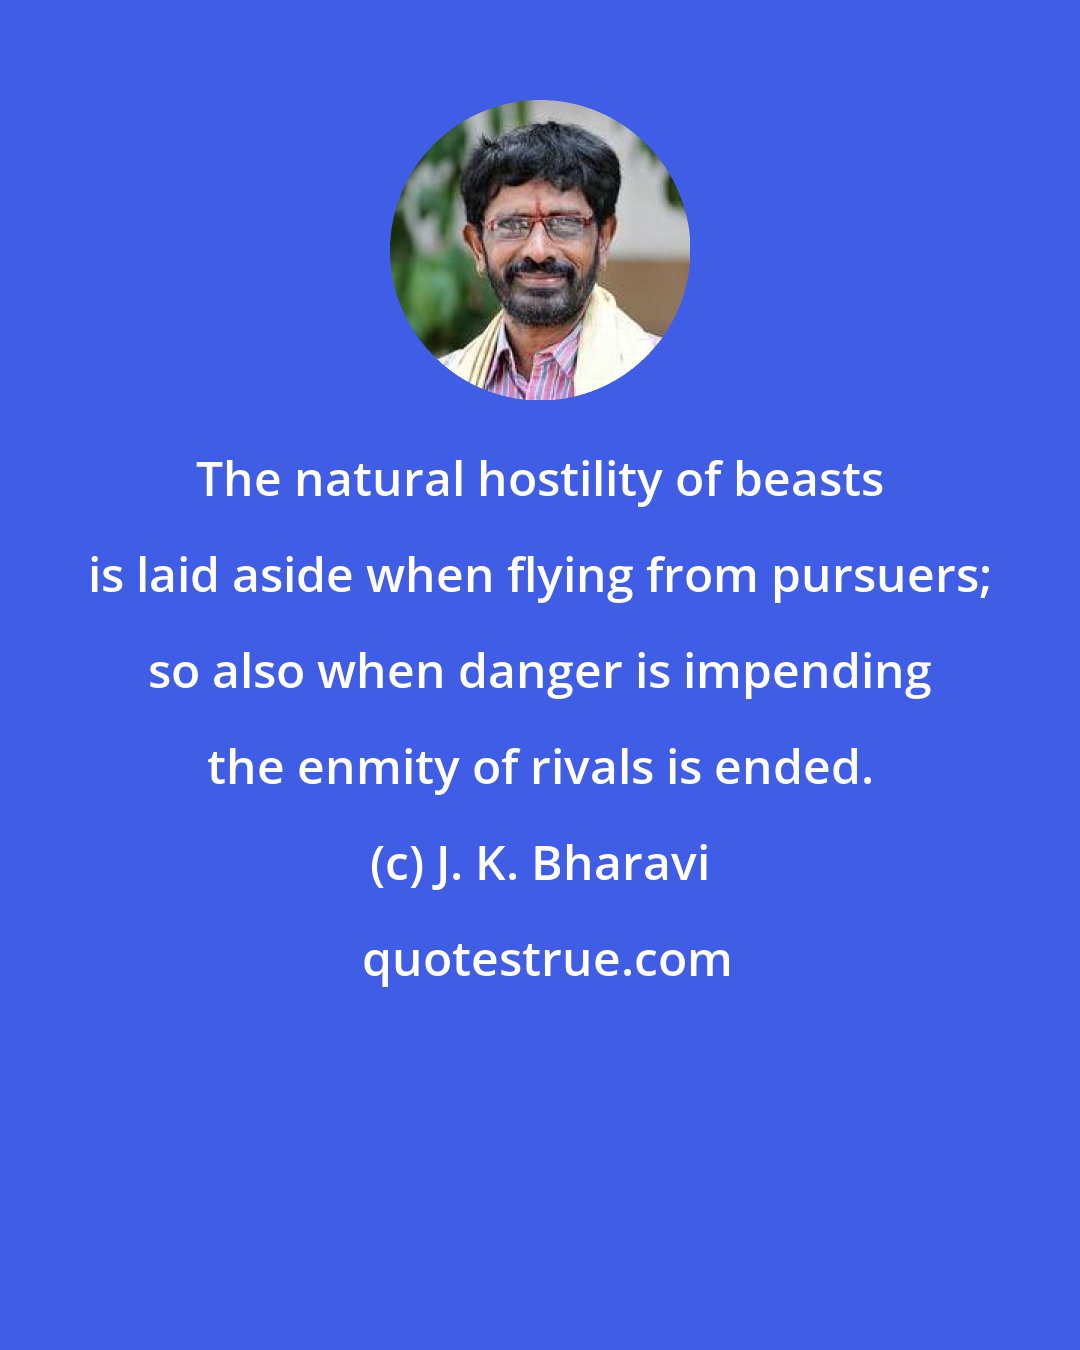 J. K. Bharavi: The natural hostility of beasts is laid aside when flying from pursuers; so also when danger is impending the enmity of rivals is ended.